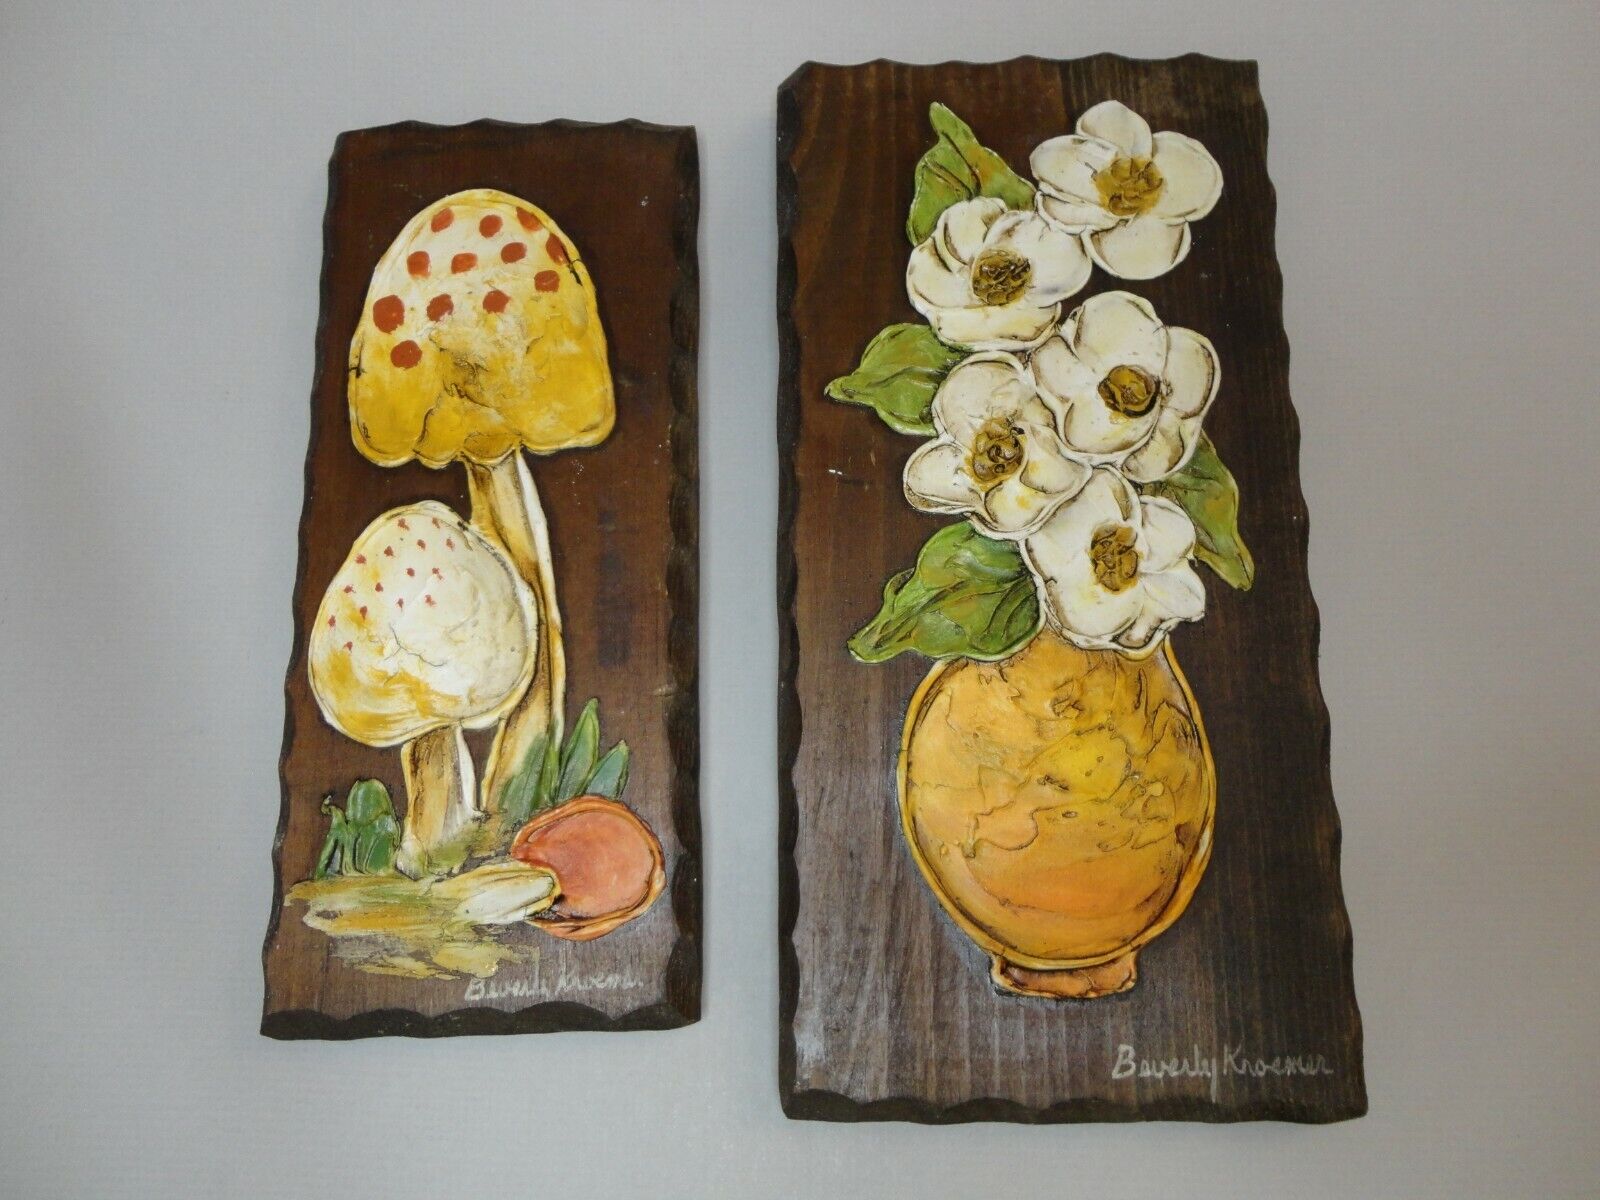 Pair Vitg Hand Painted Wall Hanging Wooden Plaques Flowers & Mushrooms Signed